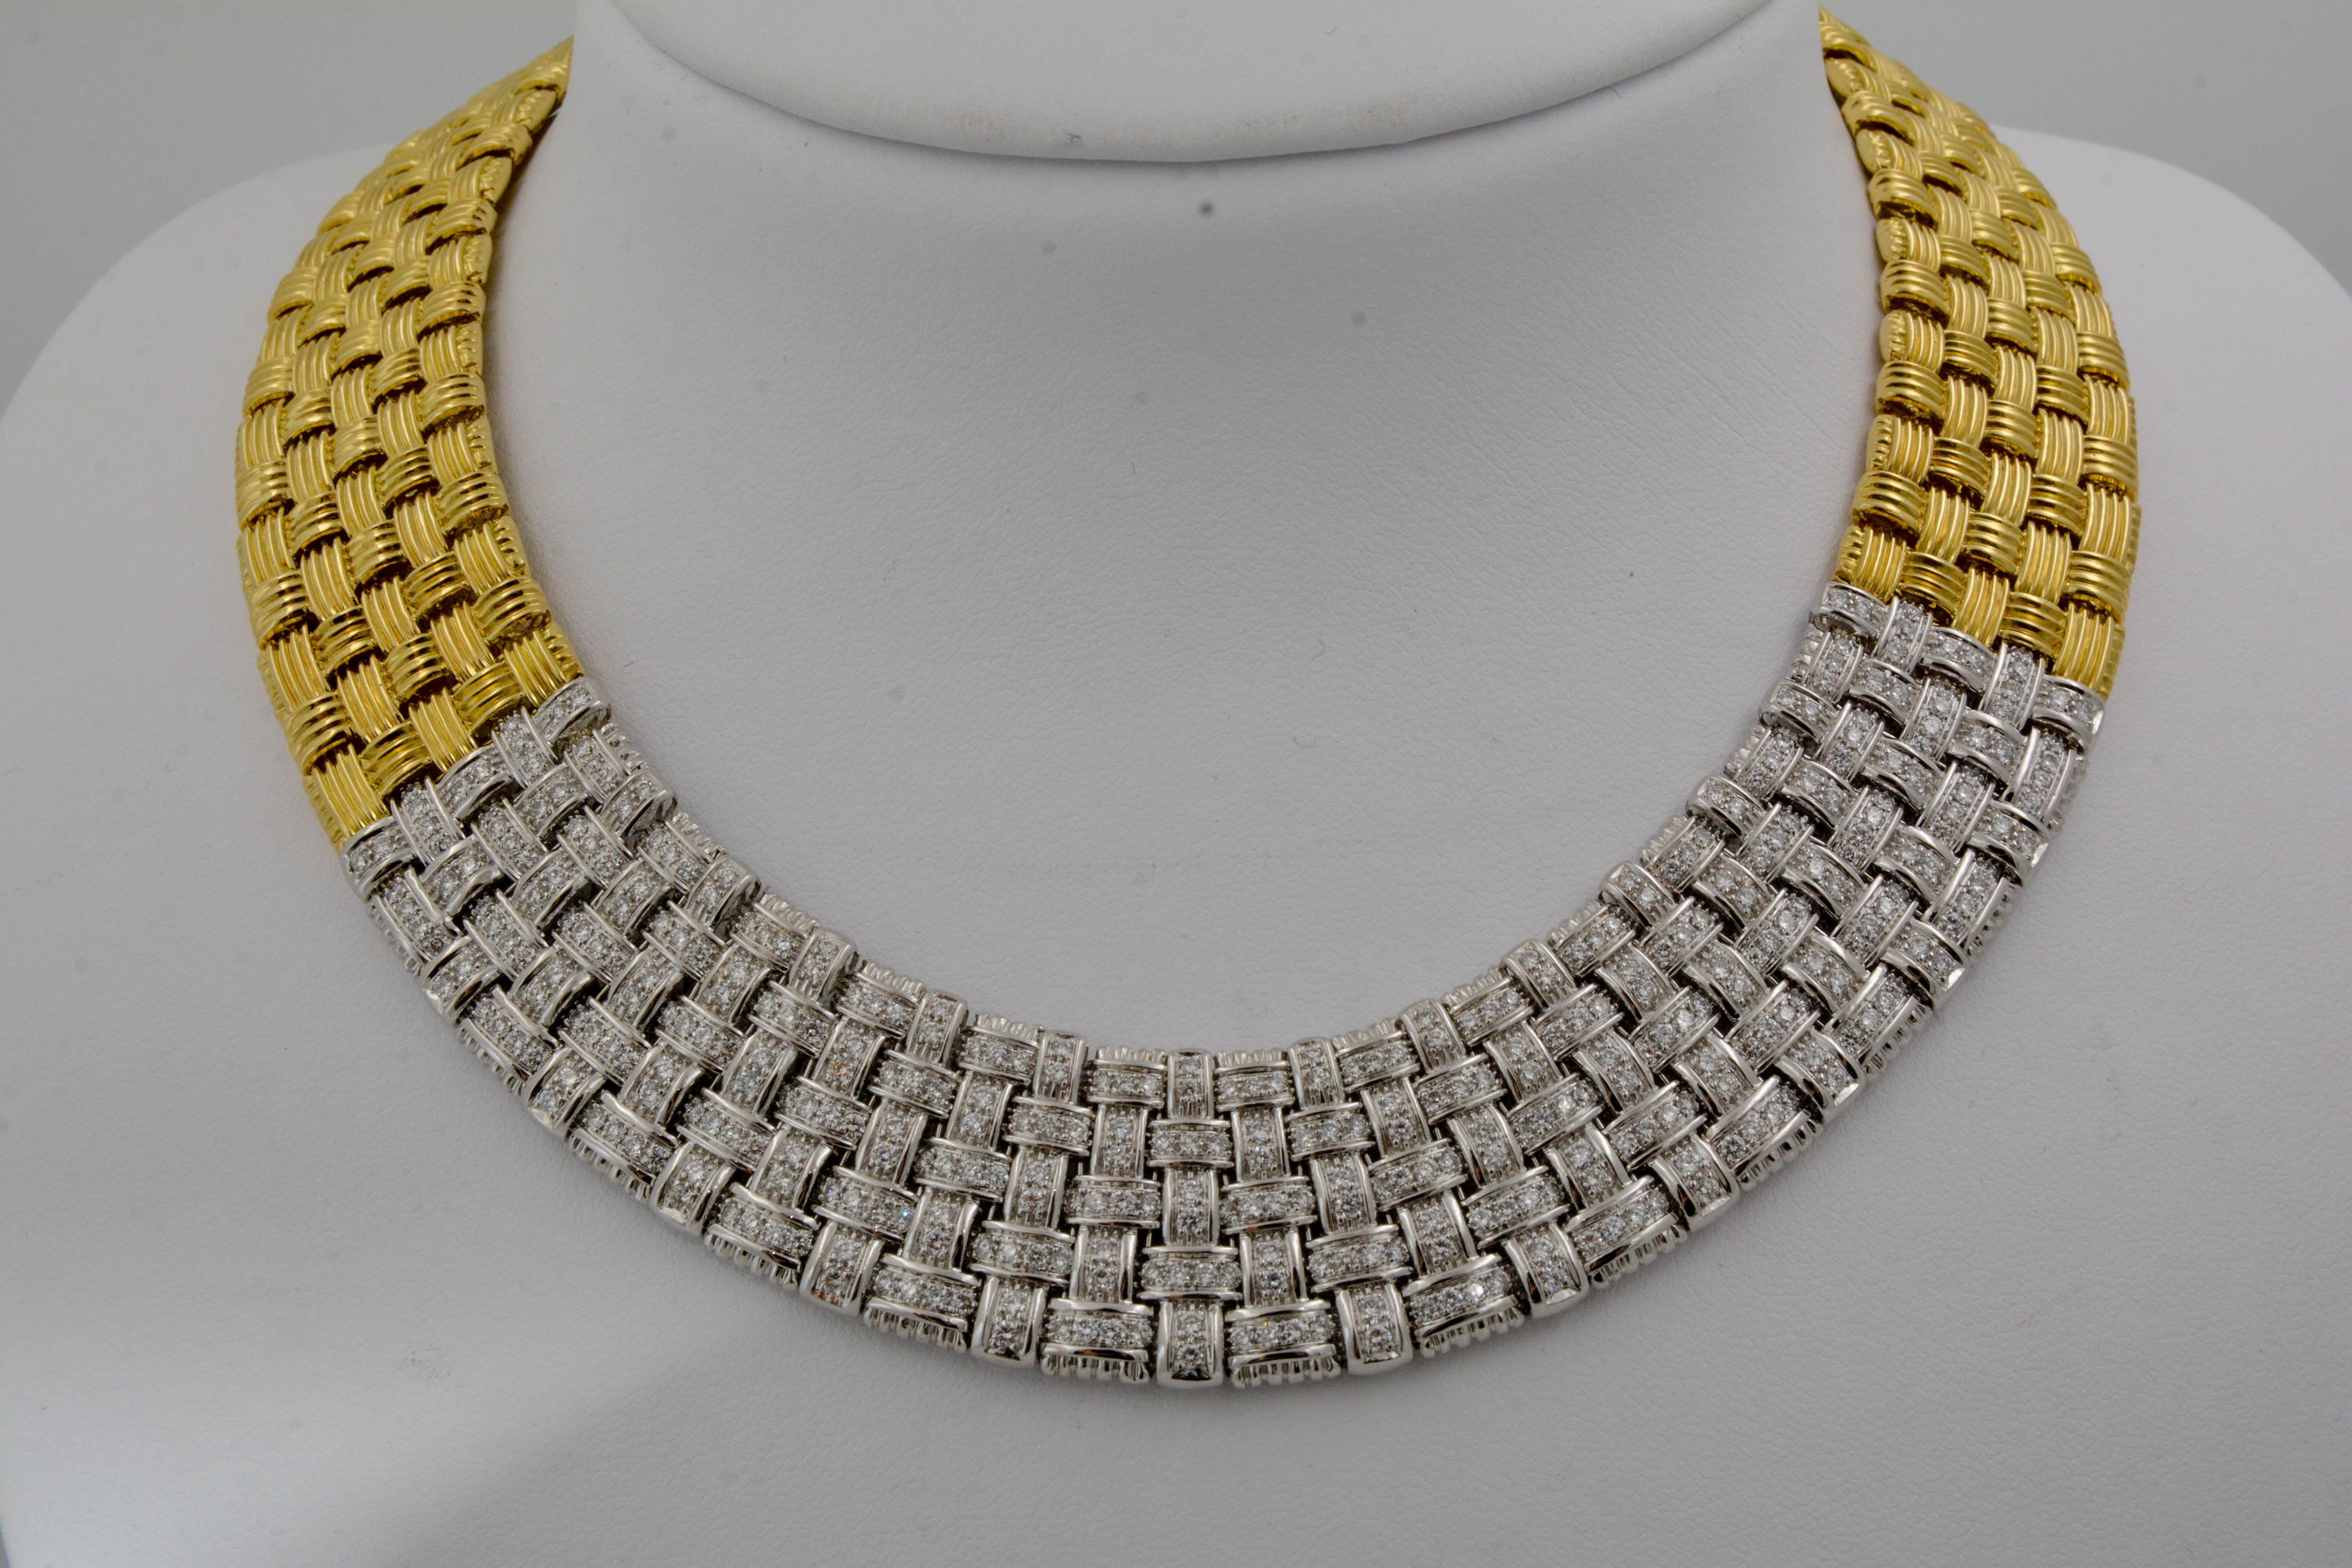 Italian designer Roberto Coin is known for his romantic and timeless craftsmanship; the brand has become an international success embracing creativity and quality. This five-row 18K yellow and white gold interlocking ribbed necklace is from the